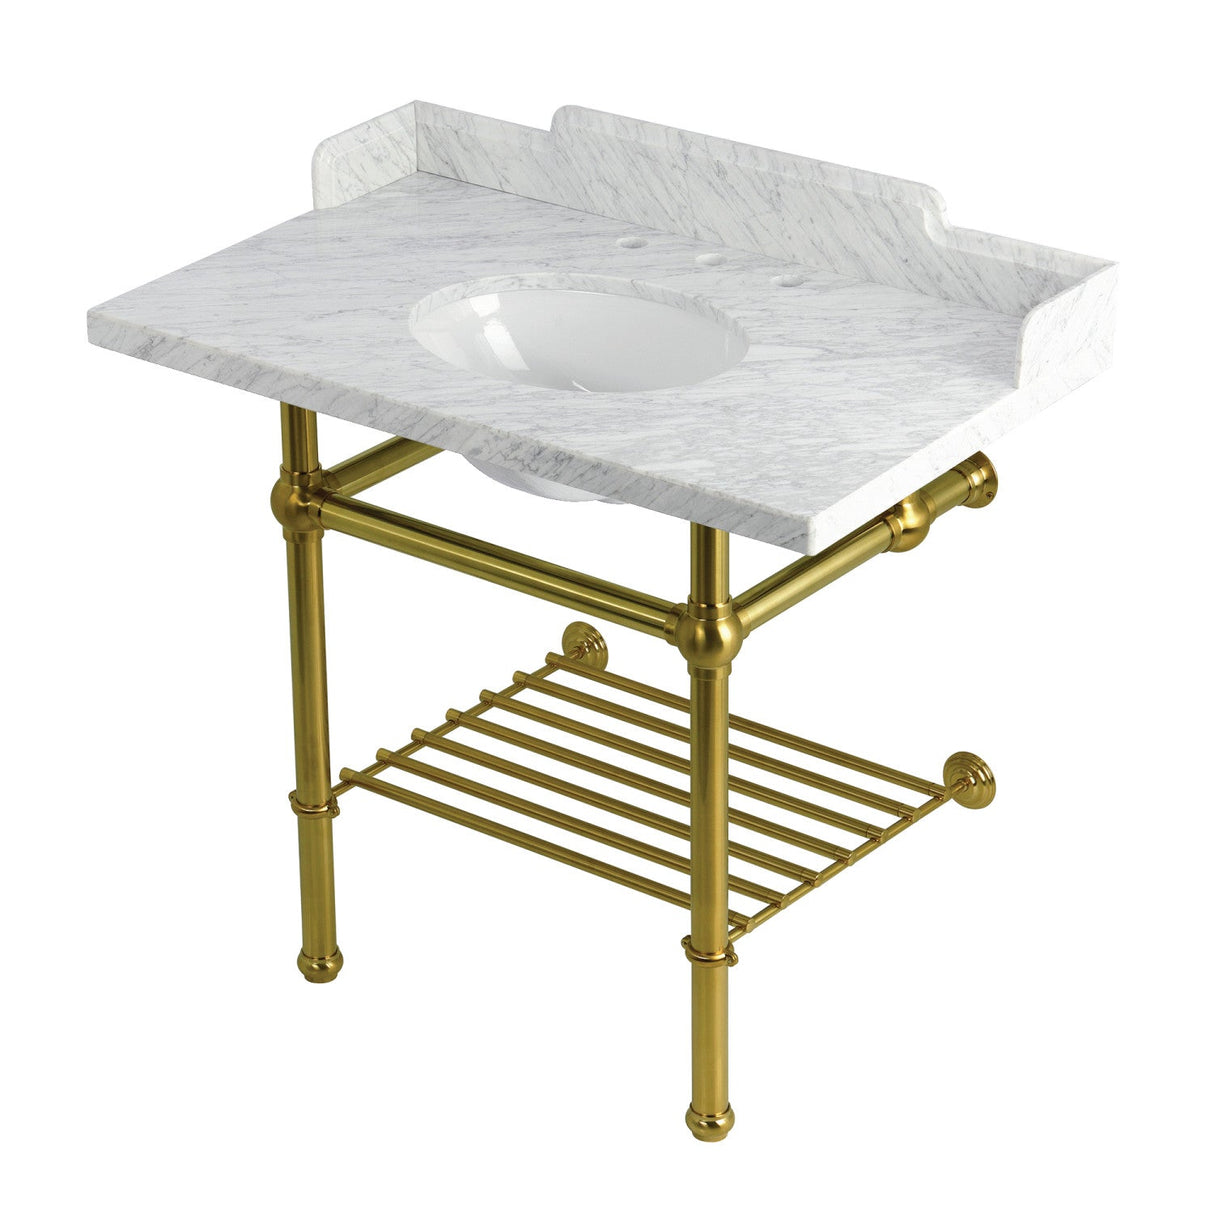 Pemberton LMS3630MBB7 36-Inch Console Sink with Brass Legs (8-Inch, 3 Hole), Marble White/Brushed Brass